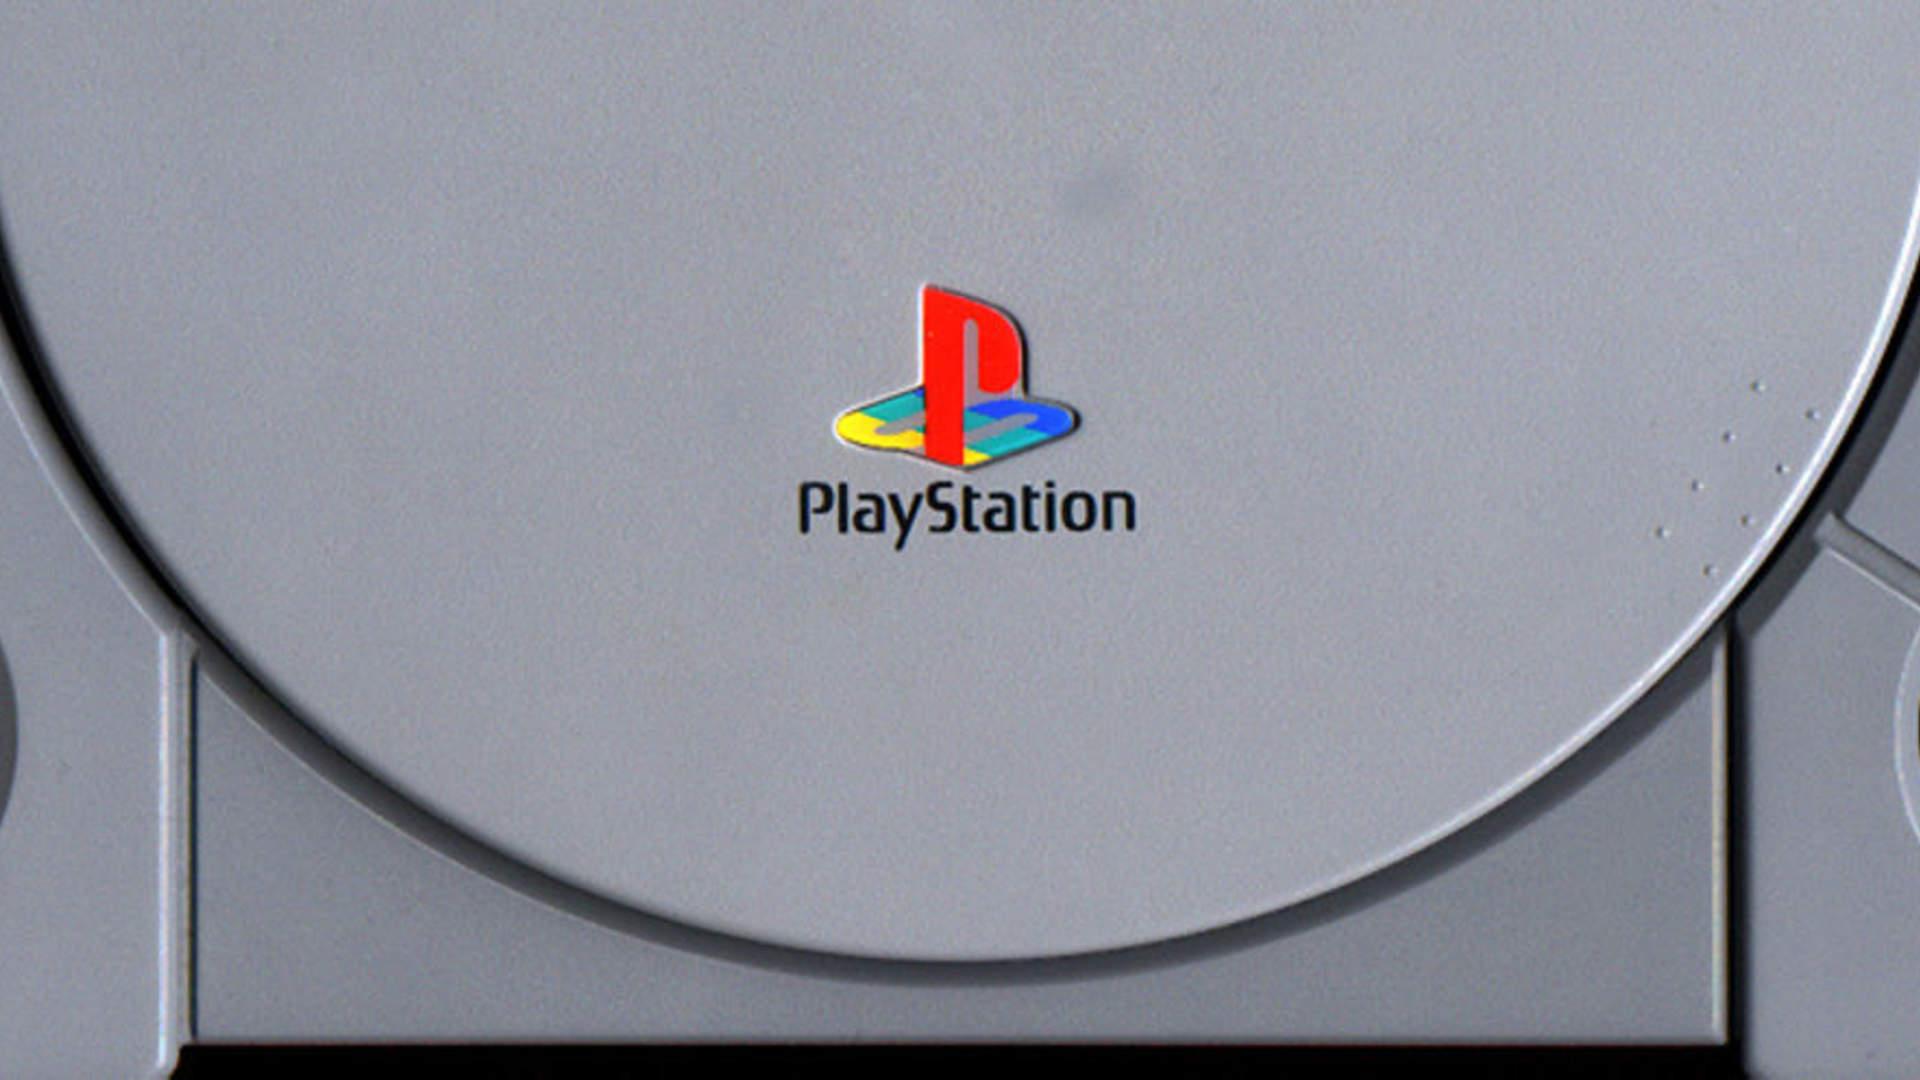 Why the Contribution Retro Consoles Like PlayStation Classic Make